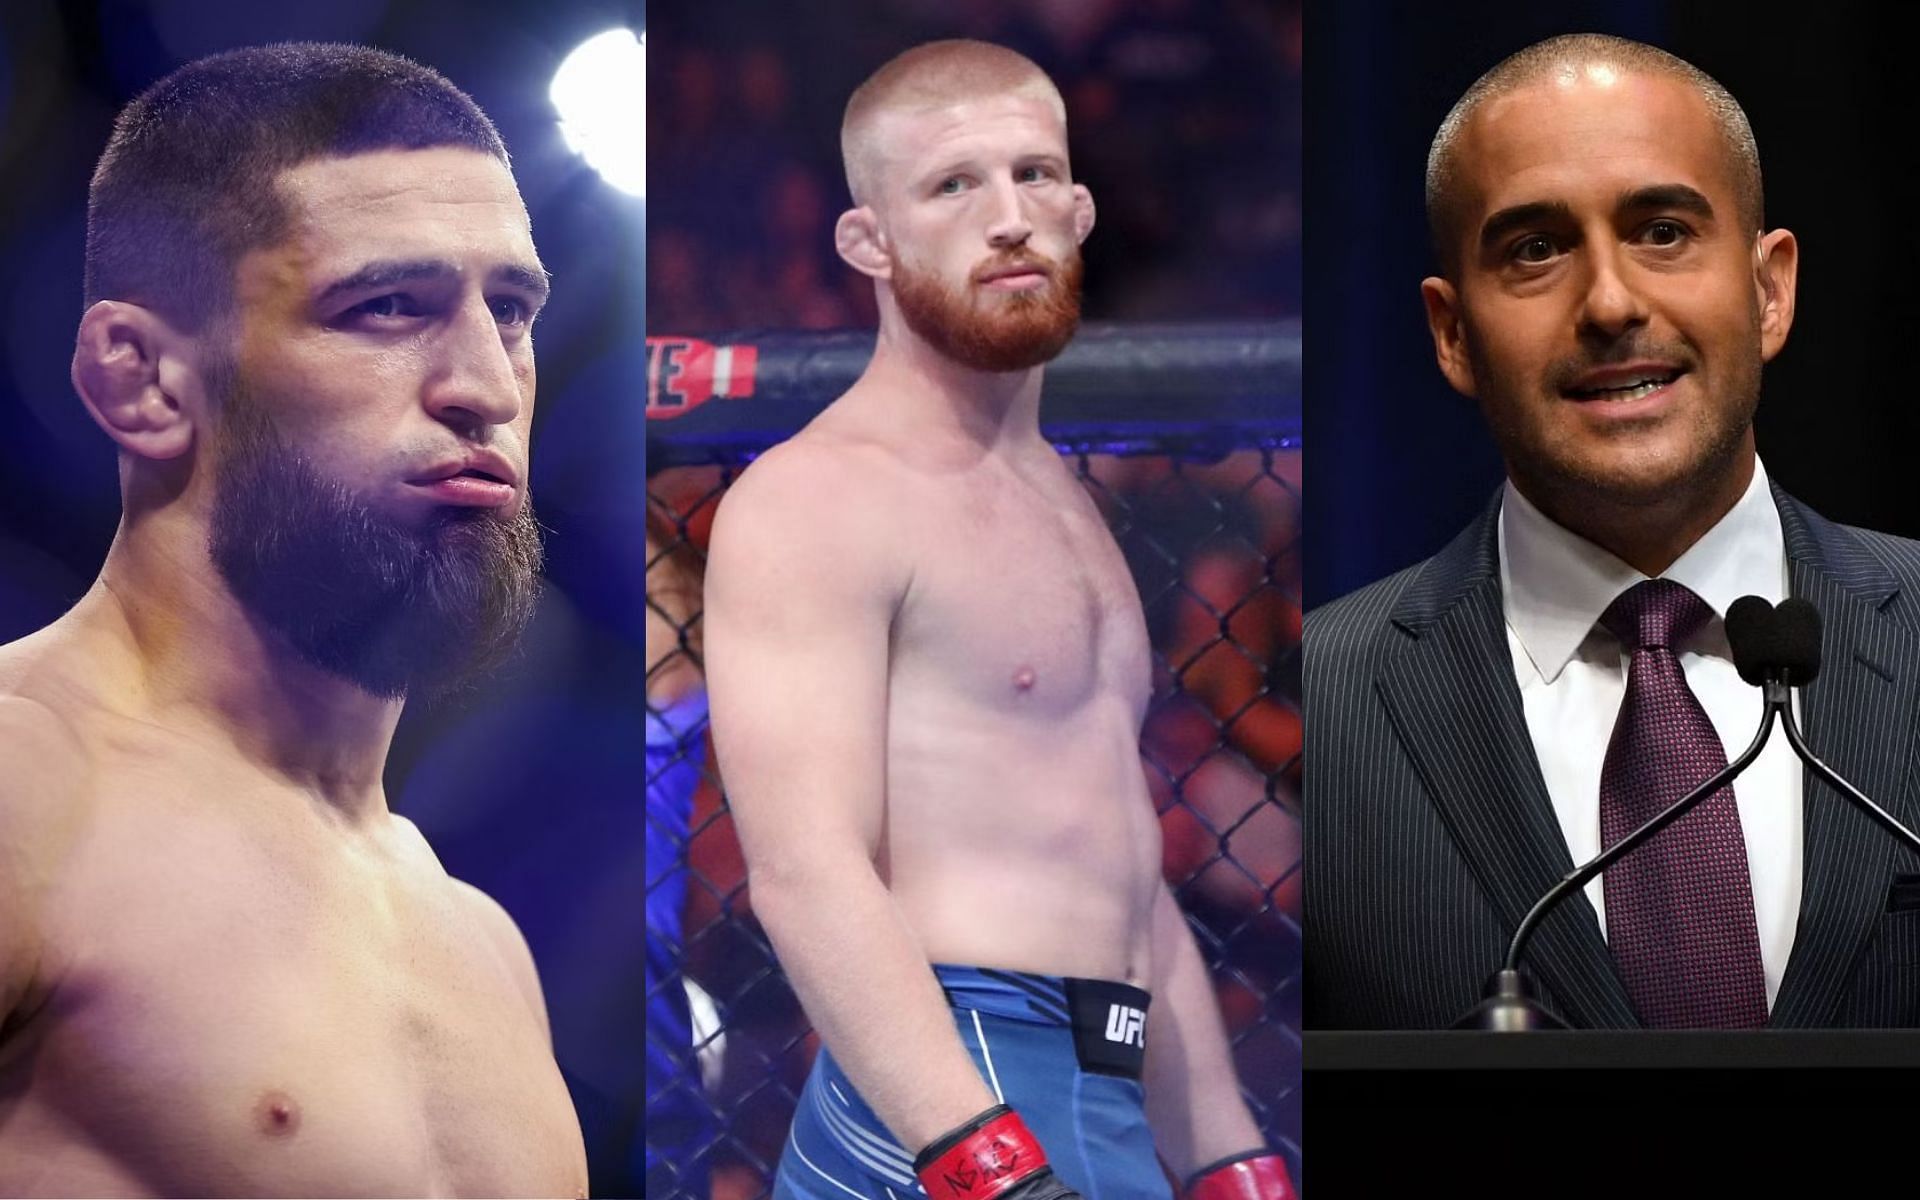 Jon Anik (right) compares Khamzat Chimaev (left) to Bo Nickal (middle) following outcry over his UFC 300 slot [Images Courtesy: @GettyImages]